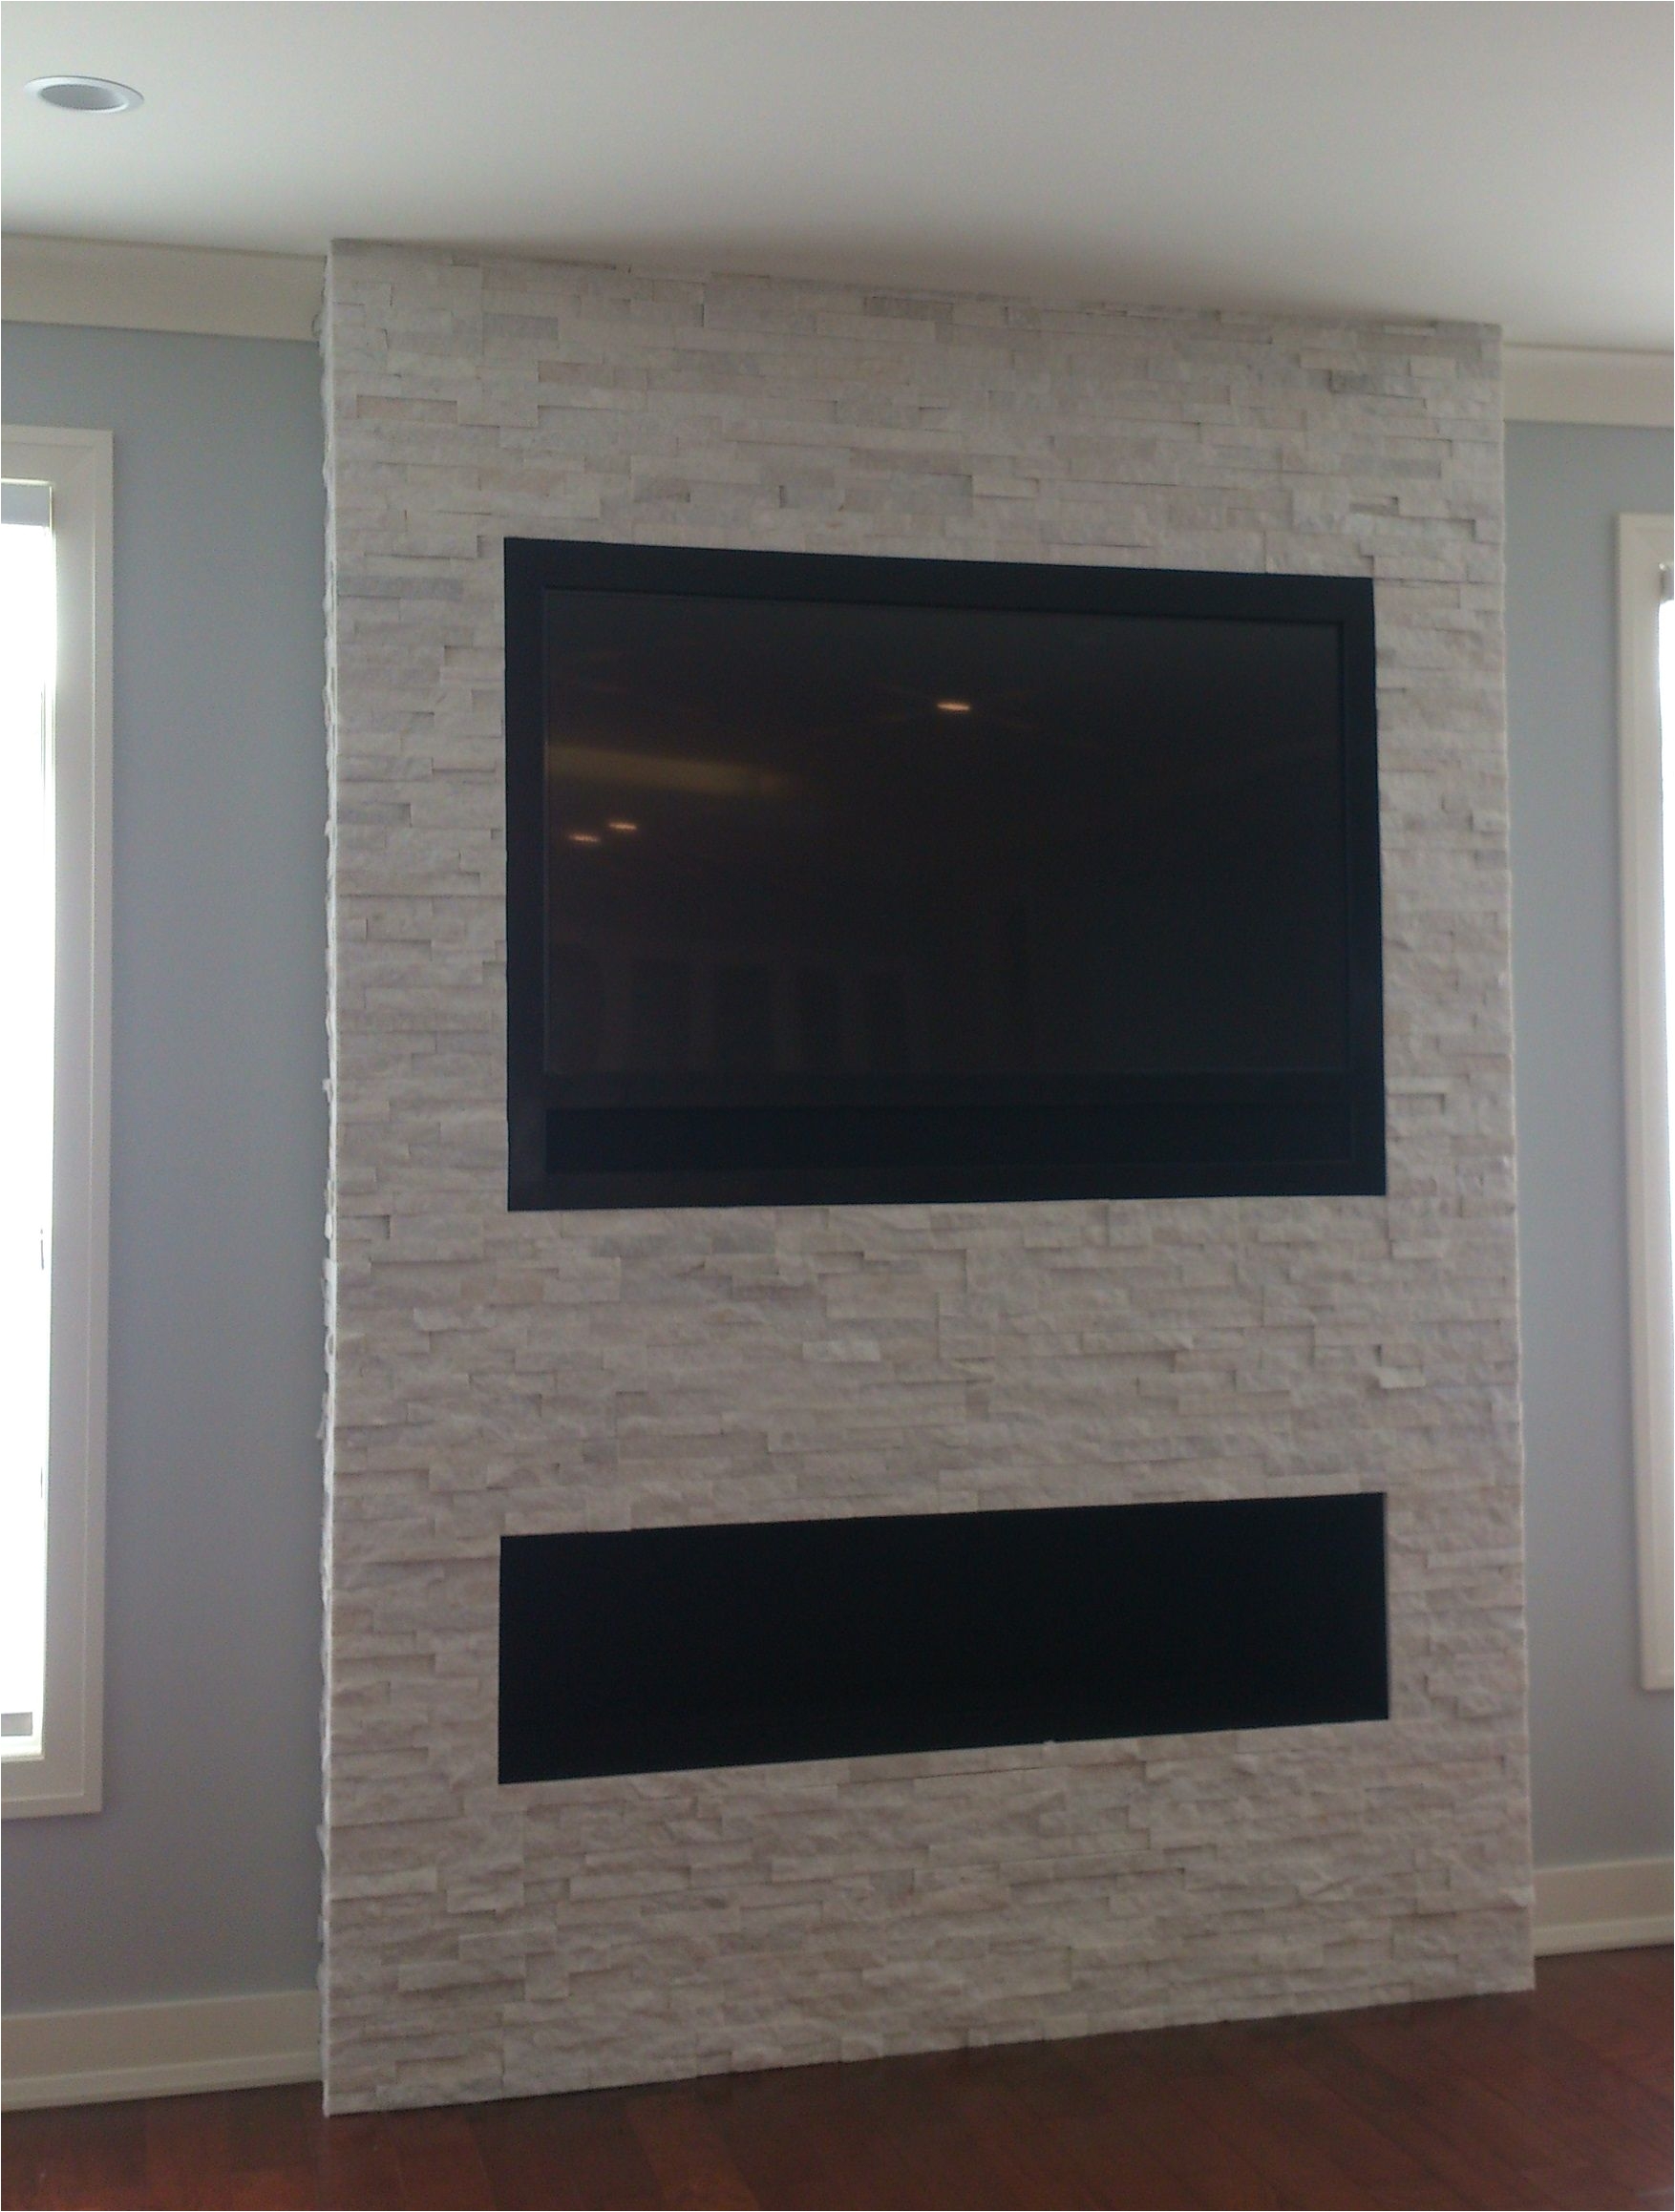 Can You Hang A Tv Over A Fireplace Beautiful Gas Fireplace without Mantle Wondering How to Mount A Tv